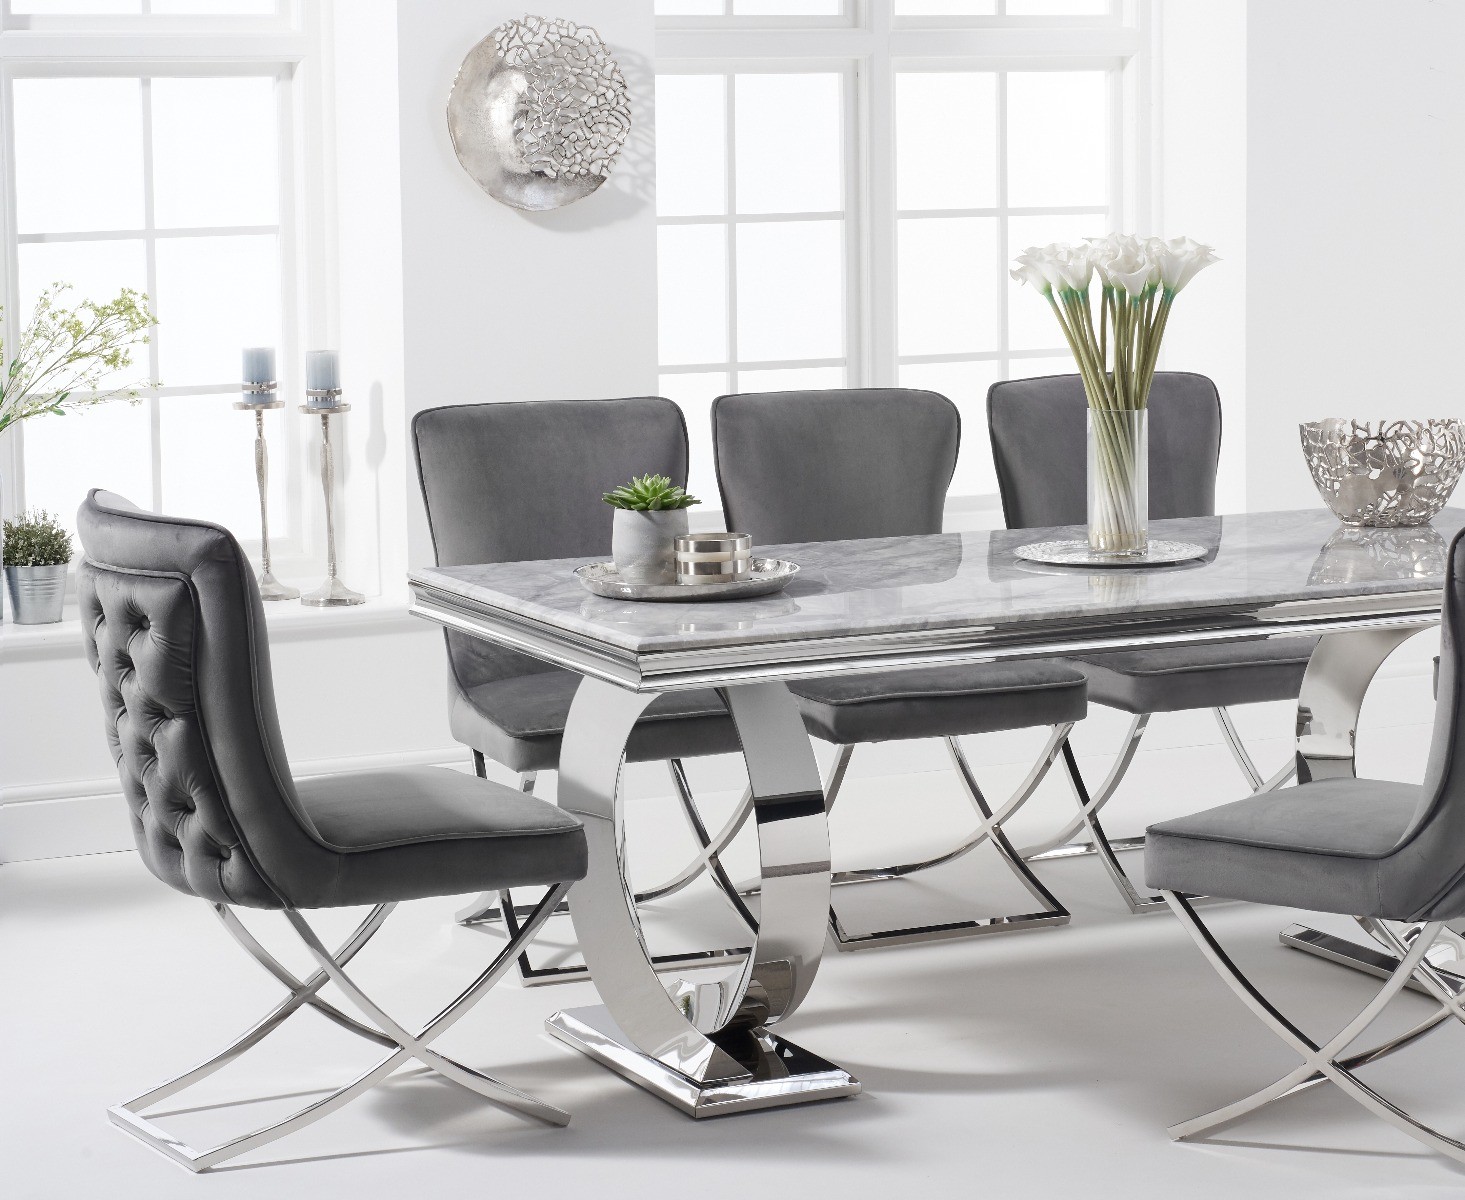 Photo 2 of Fabio 200cm marble dining table with 6 grey lorenzo chairs